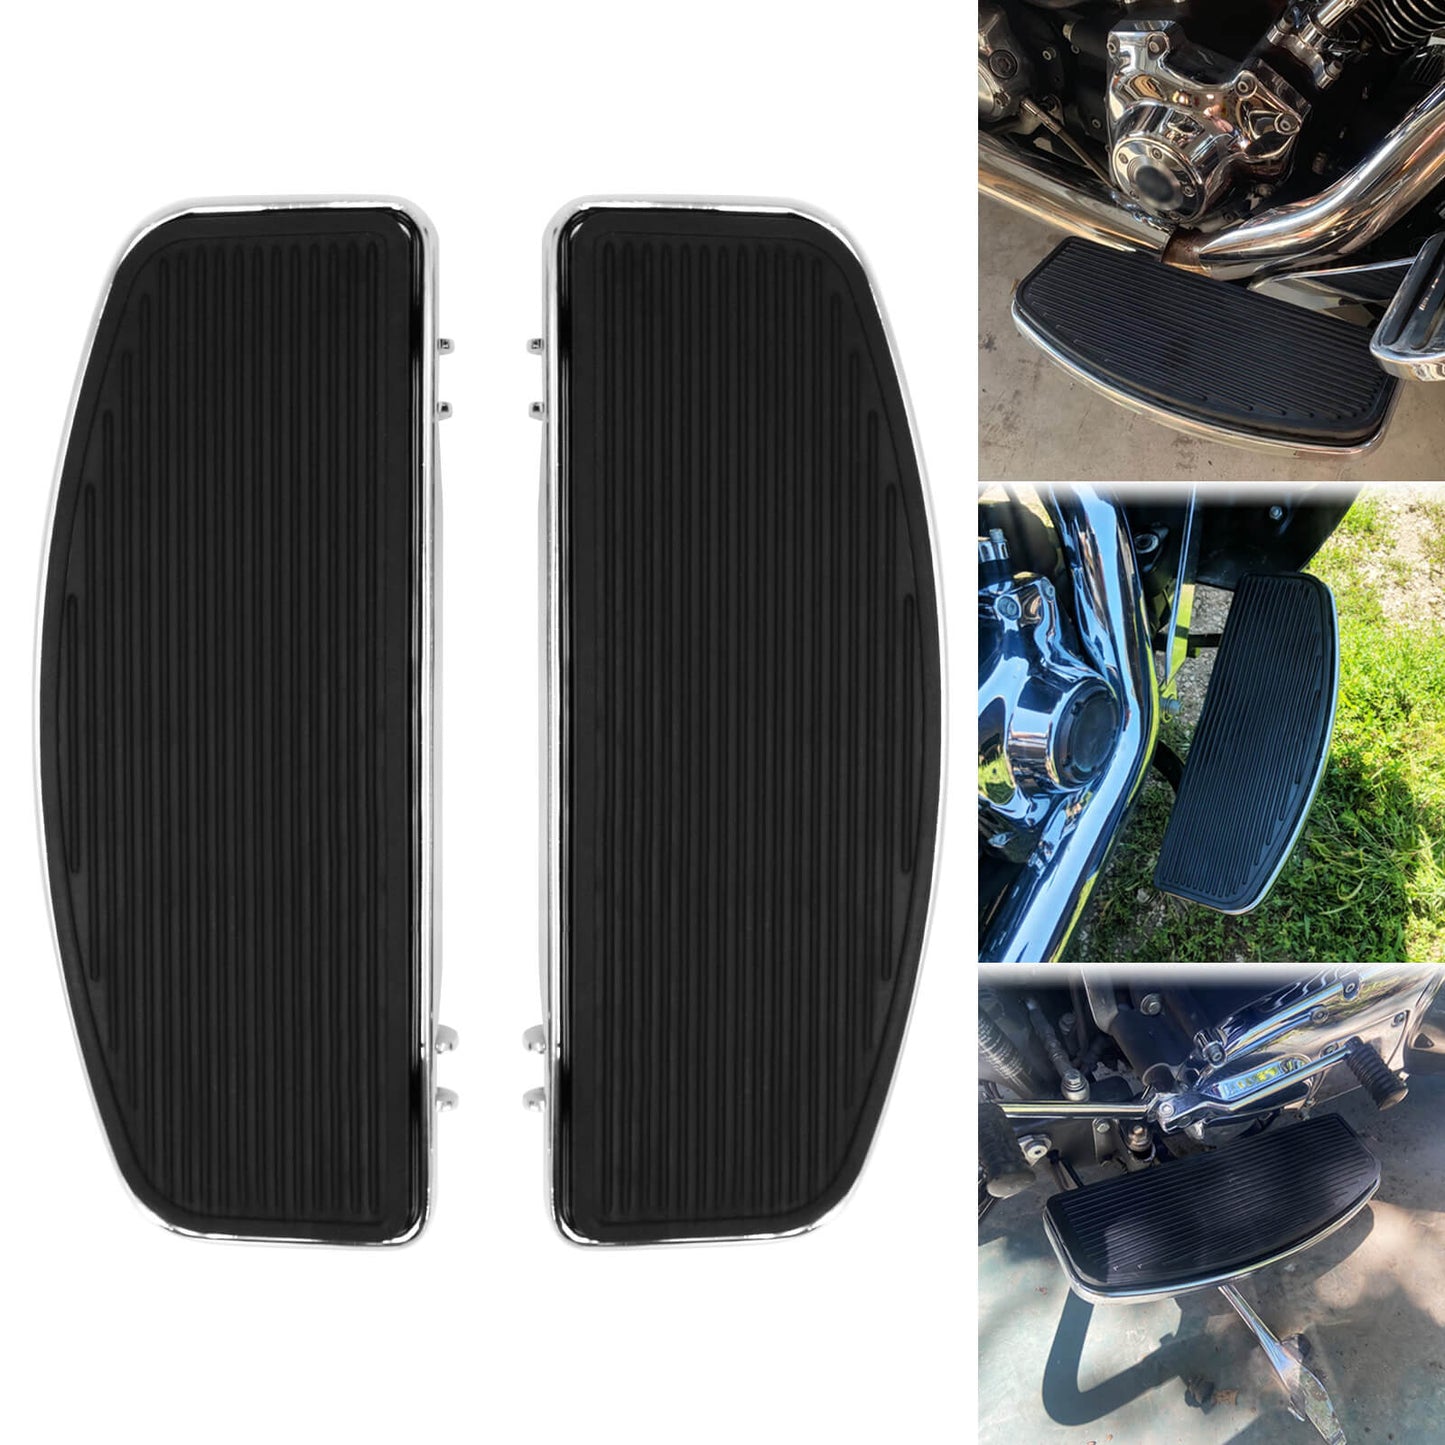 rubber-rider-floorboards-for-harley-PE012901